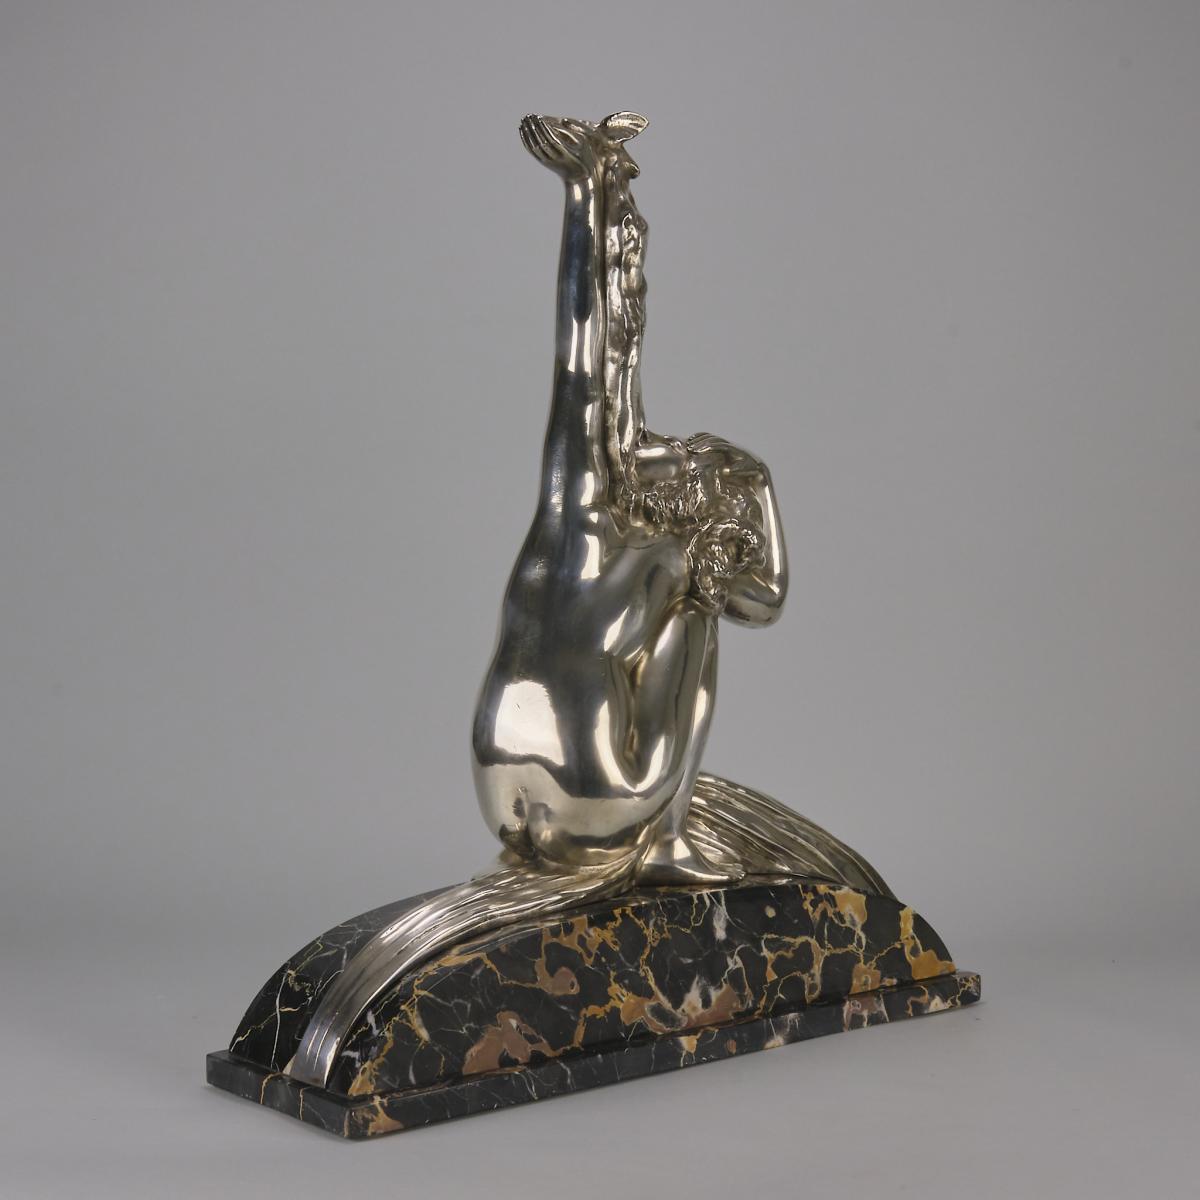 Early 20th Century Italian Silvered Bronze Sculpture entitled "Woman with Dove" by Amadeo Gennarelli